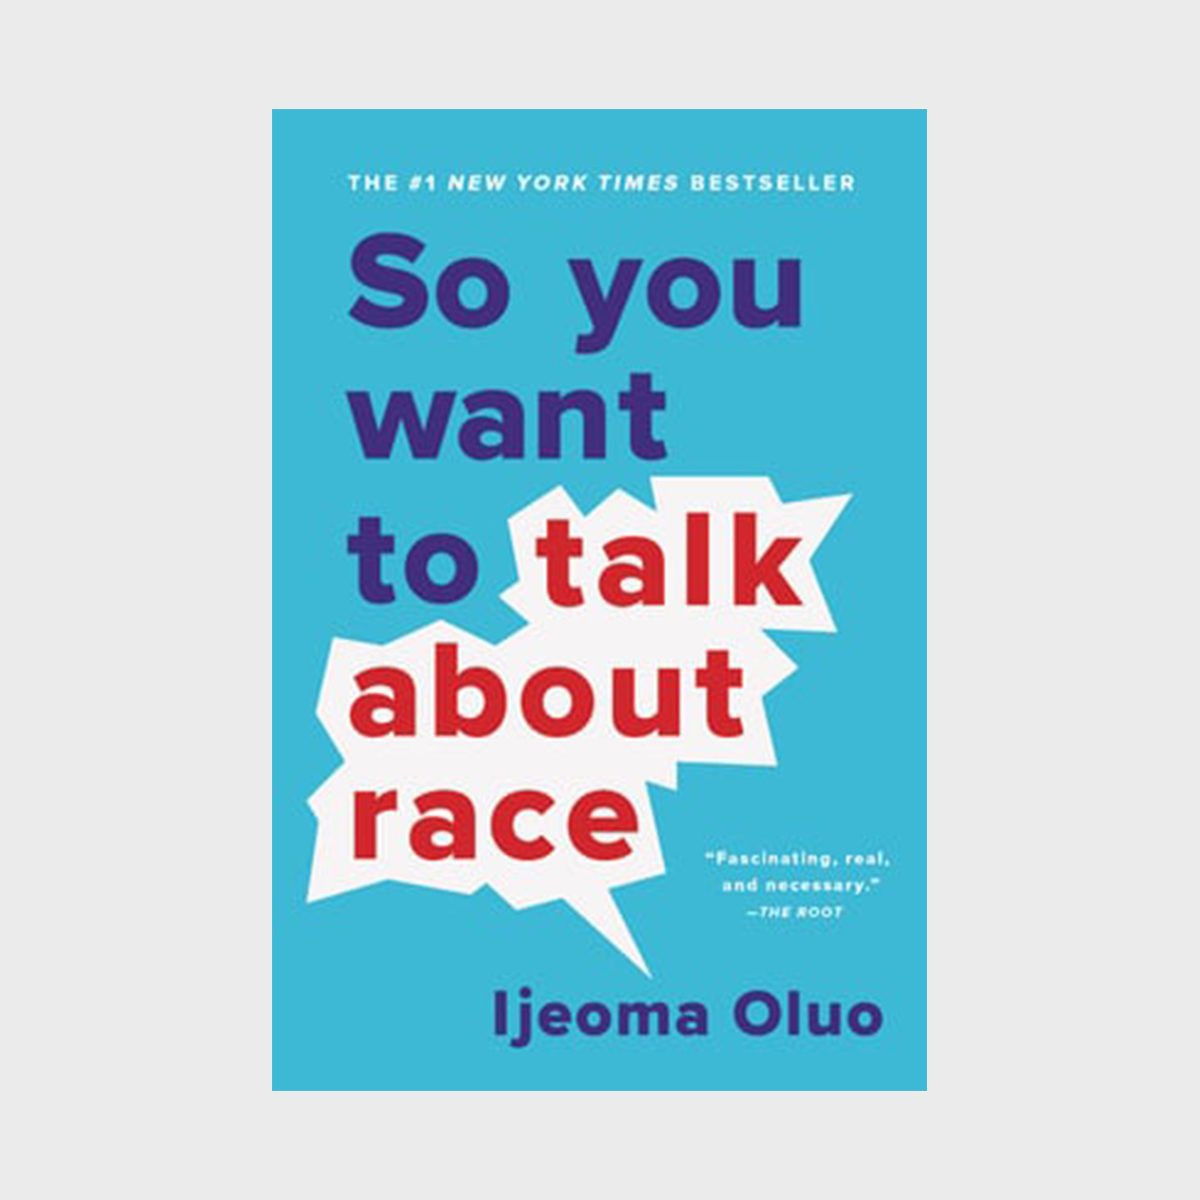 So You Want To Talk About Race By Ijeoma Oluo